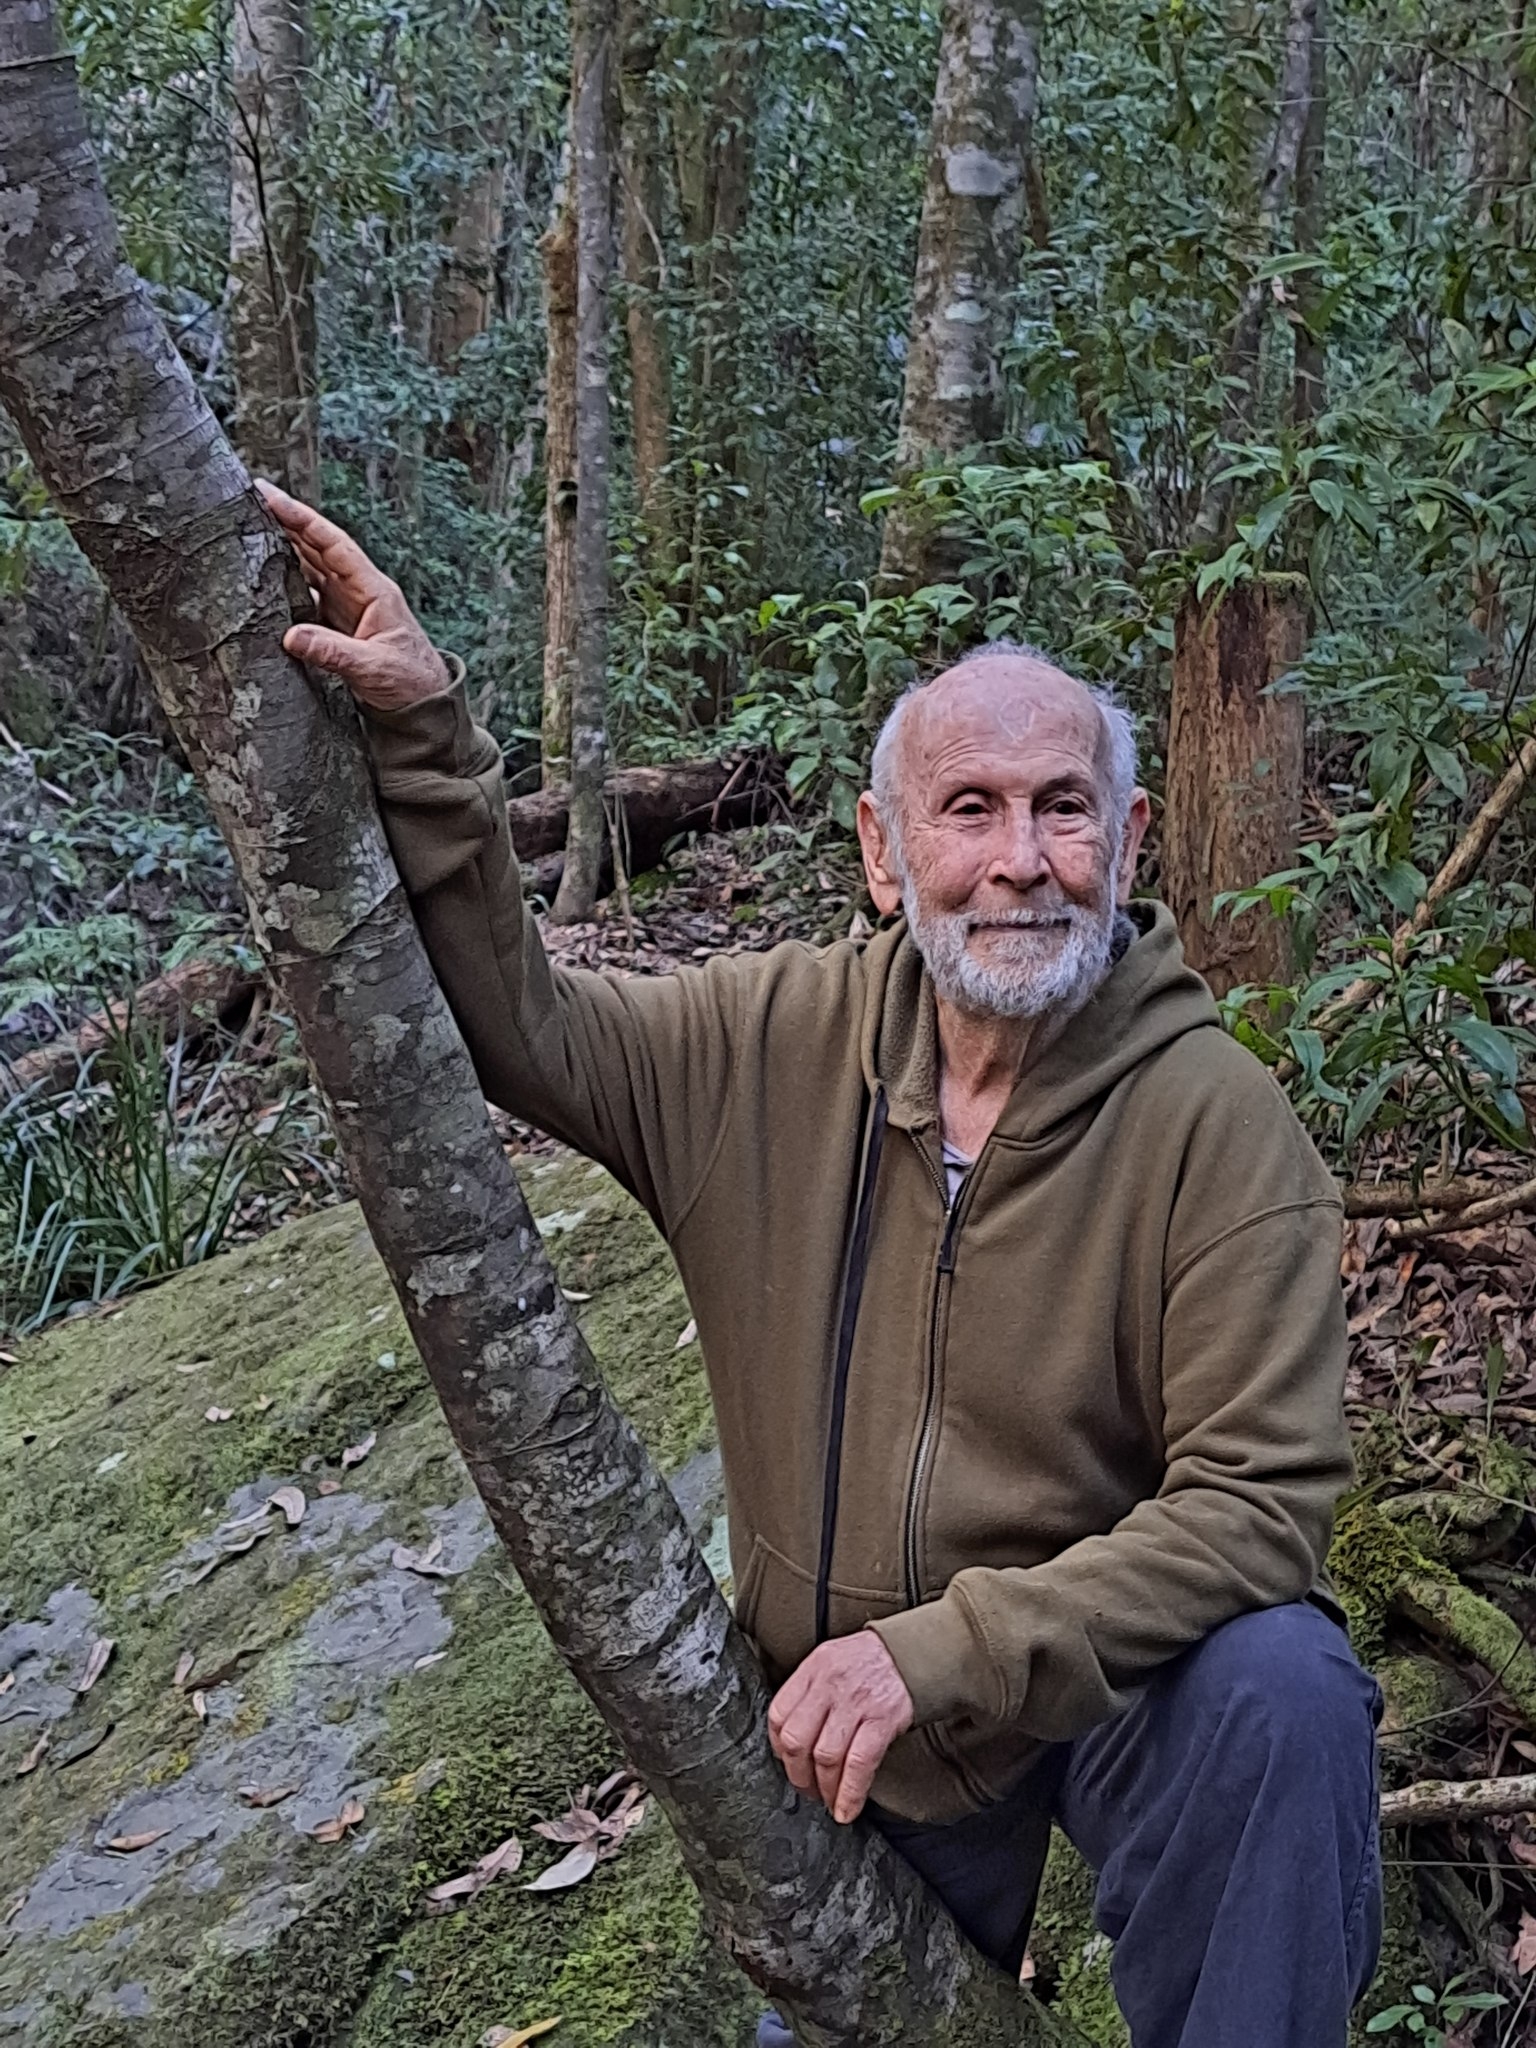 Surrounded by rainforest, John Seed touches a tree with both hands.